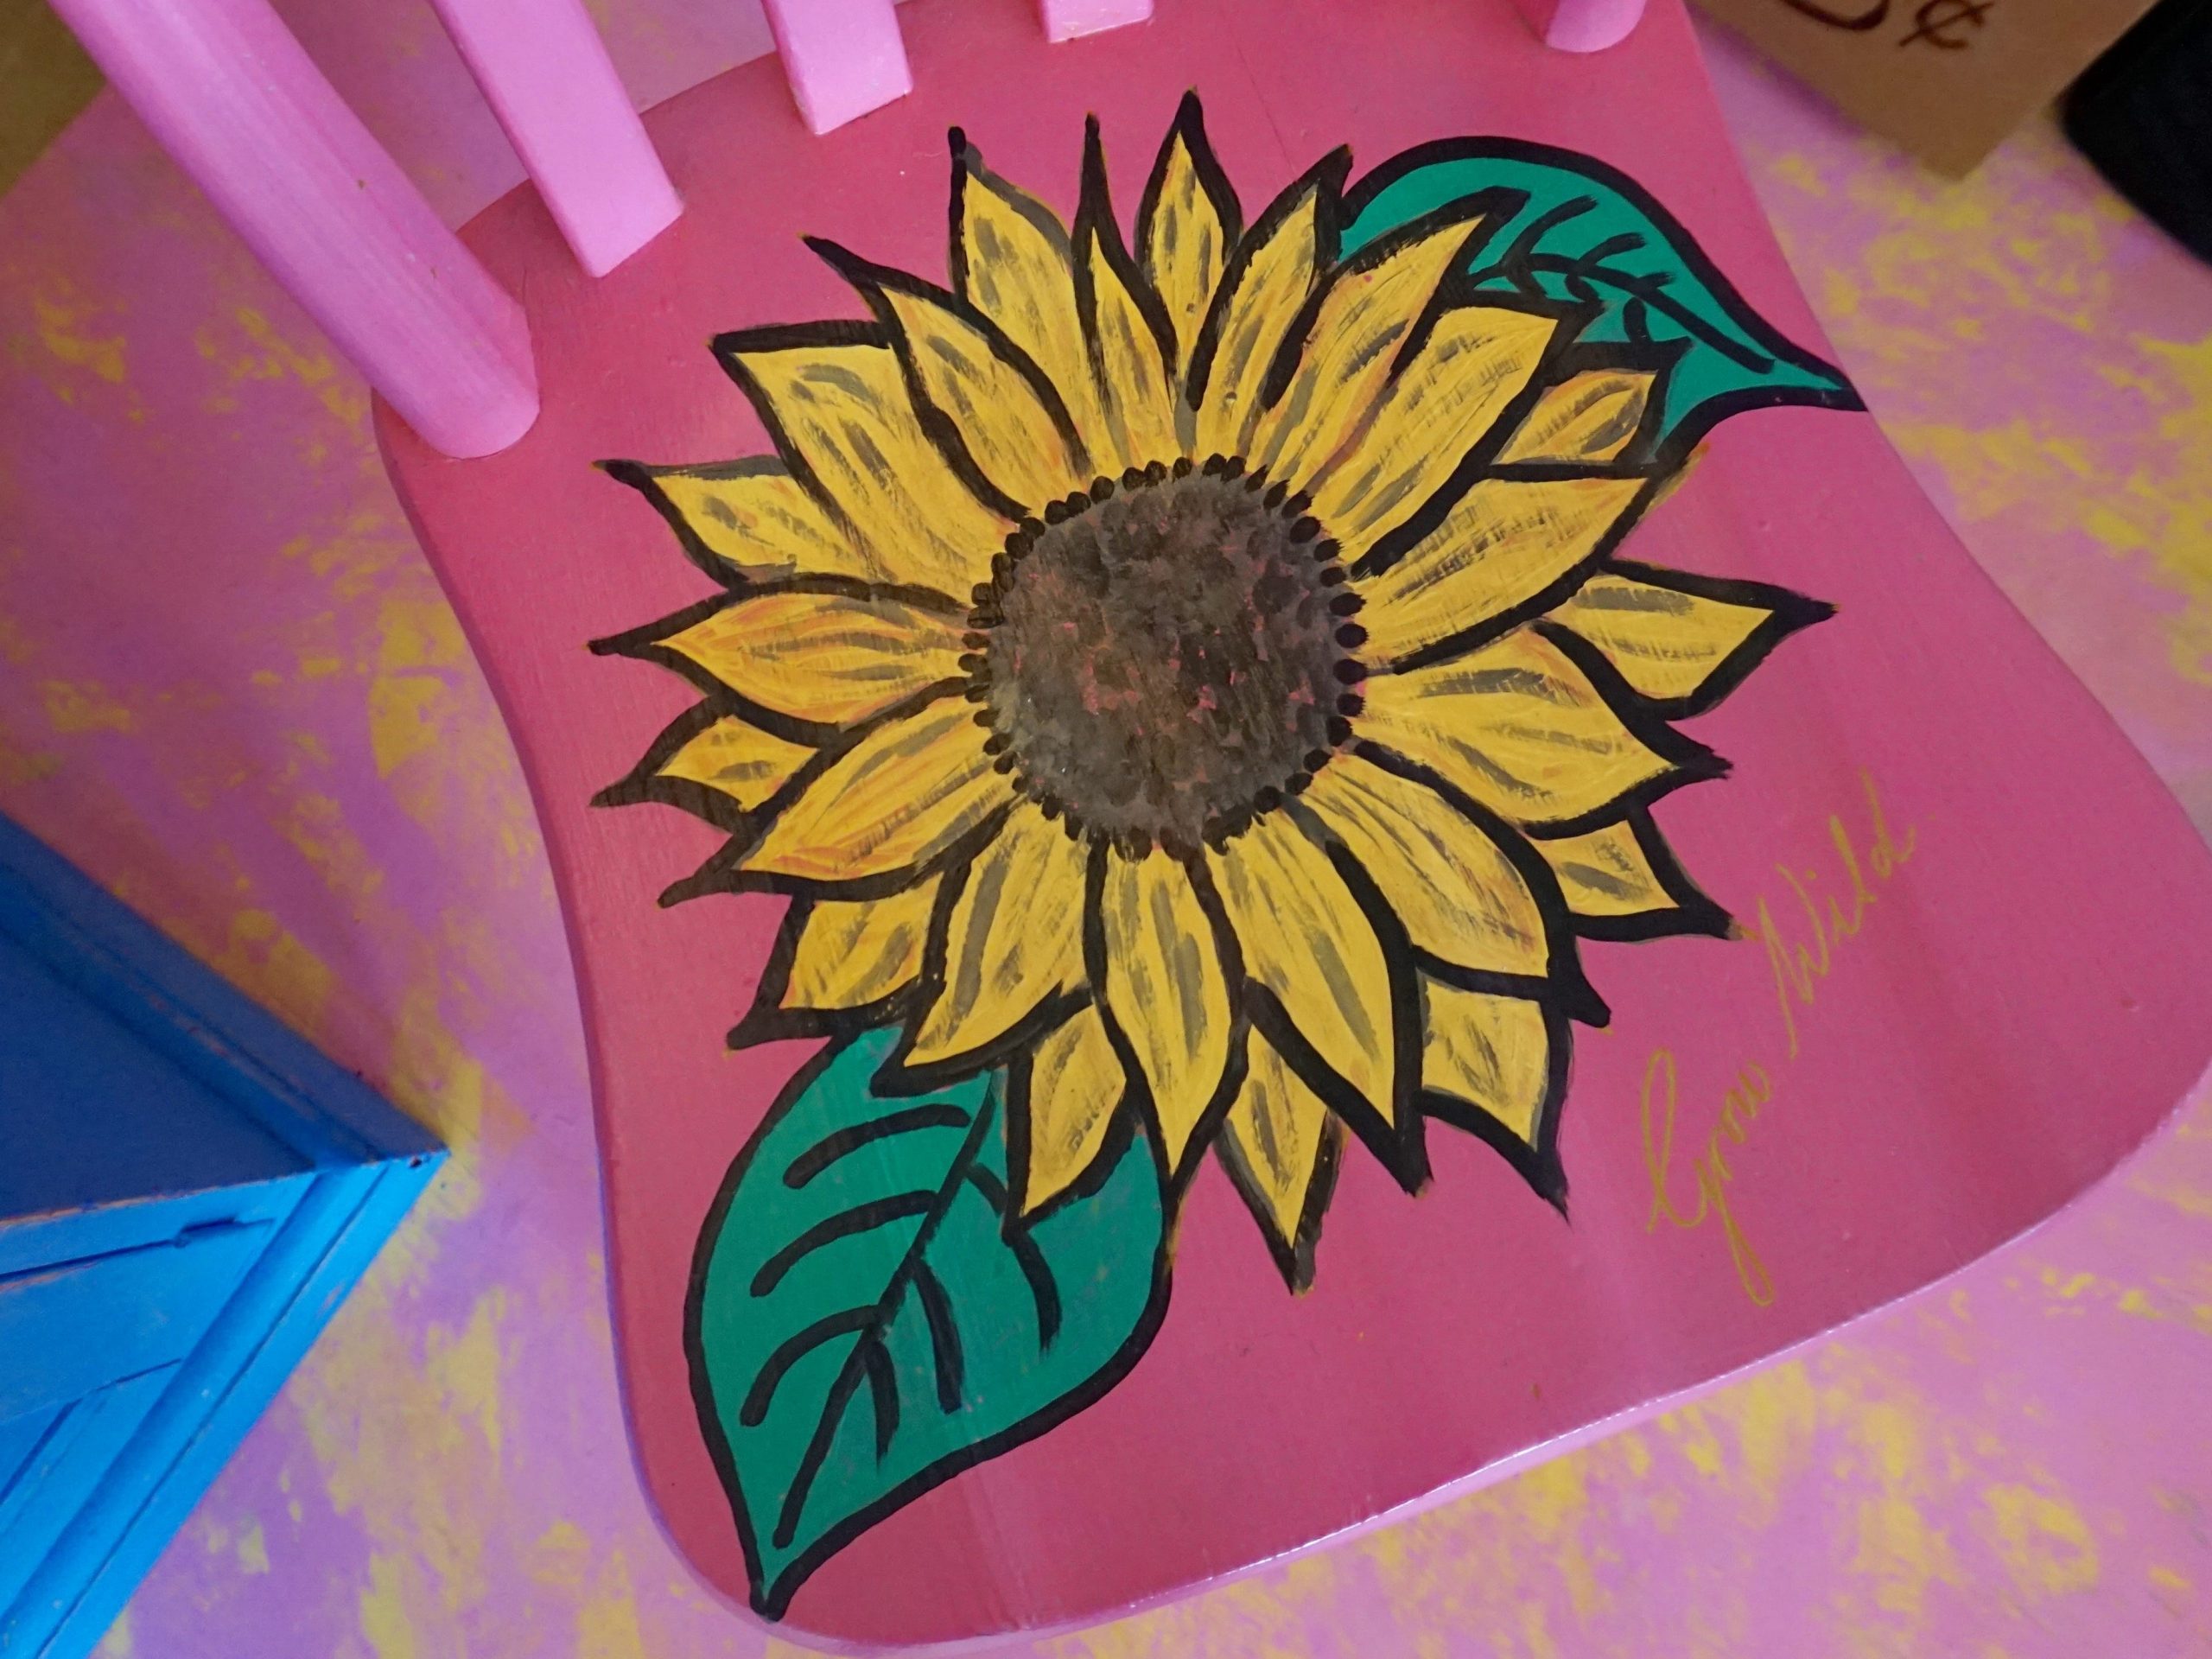 Painted chair with sunflower